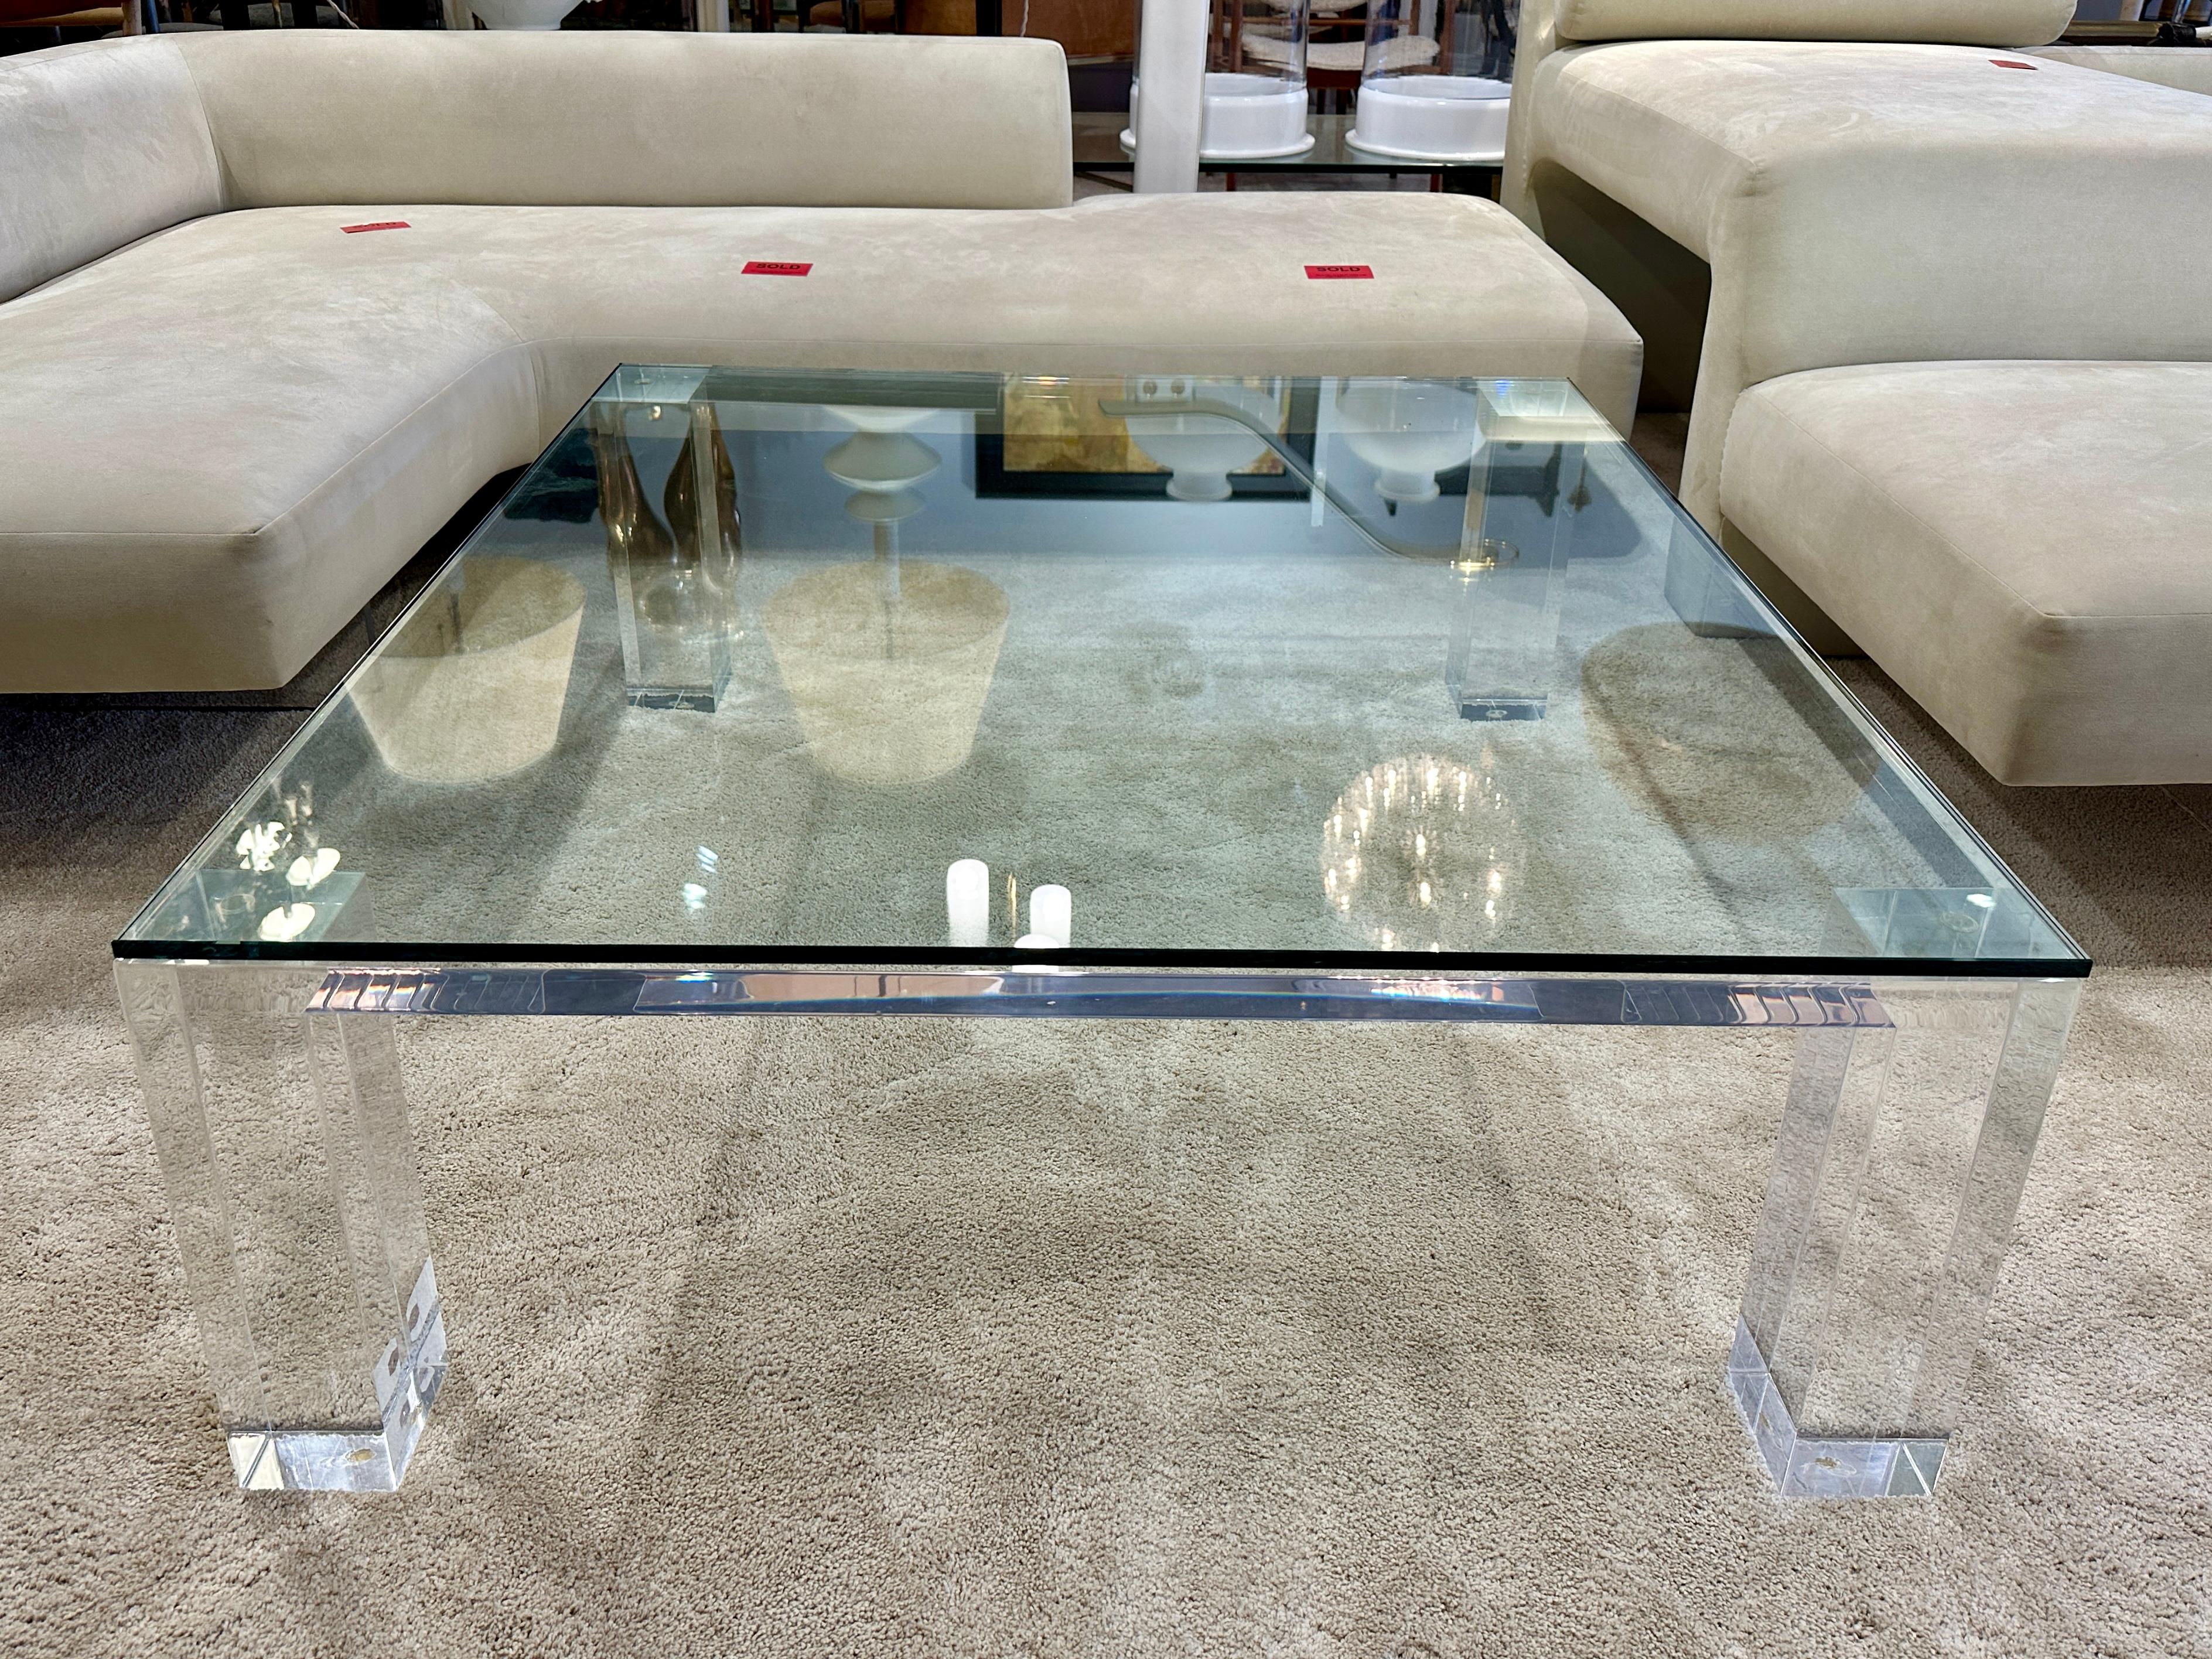 This perfect square coffee table with 4 inch thick legs and 1/2 thick glass top on 1 1/2 inch thick acrylic top. Very sturdy, heavy and important.